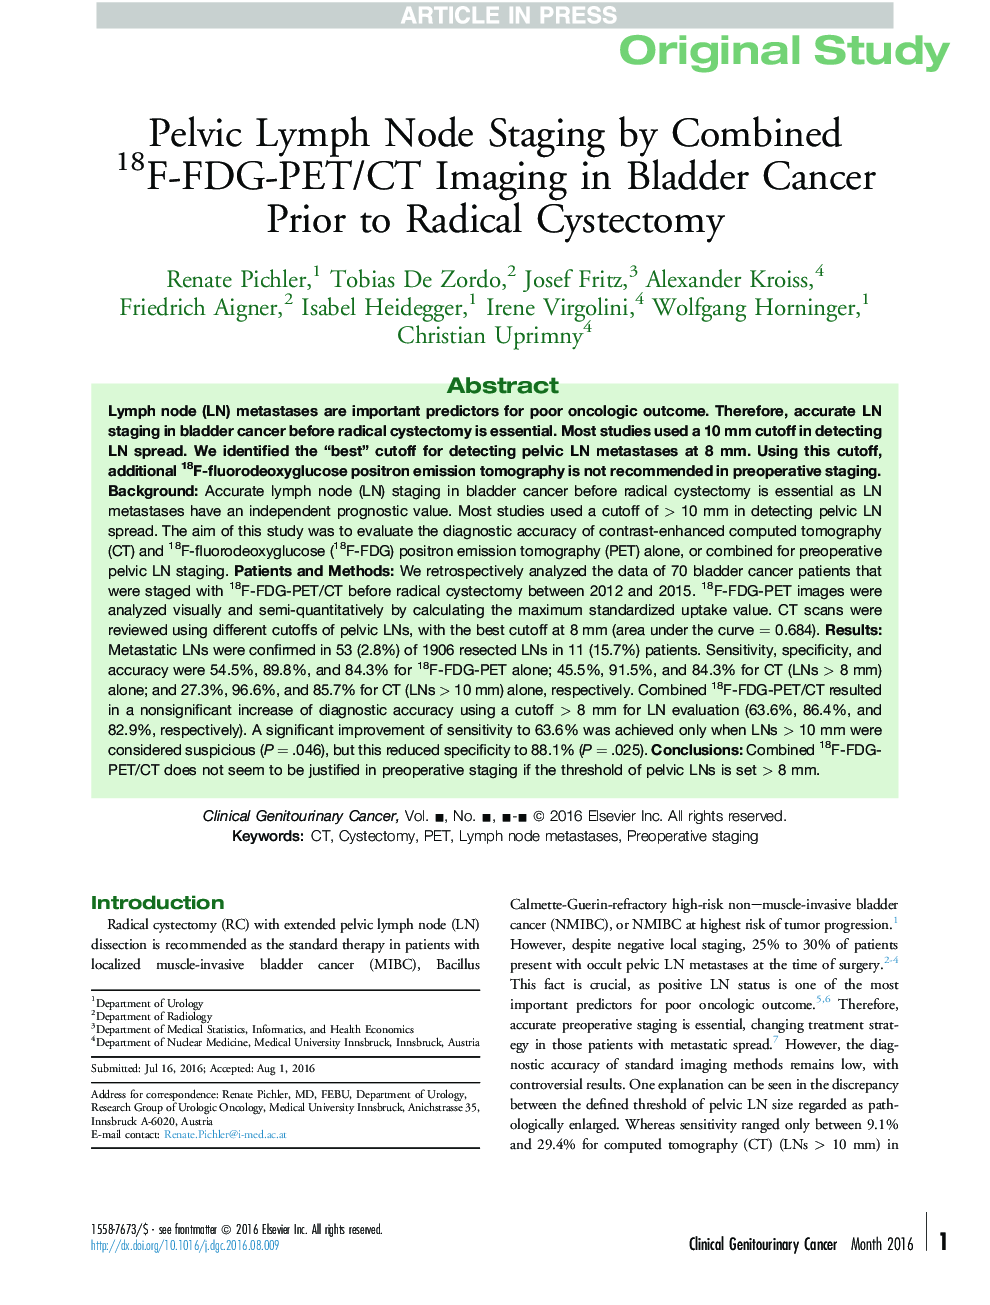 Pelvic Lymph Node Staging by Combined 18F-FDG-PET/CT Imaging in Bladder Cancer Prior to Radical Cystectomy